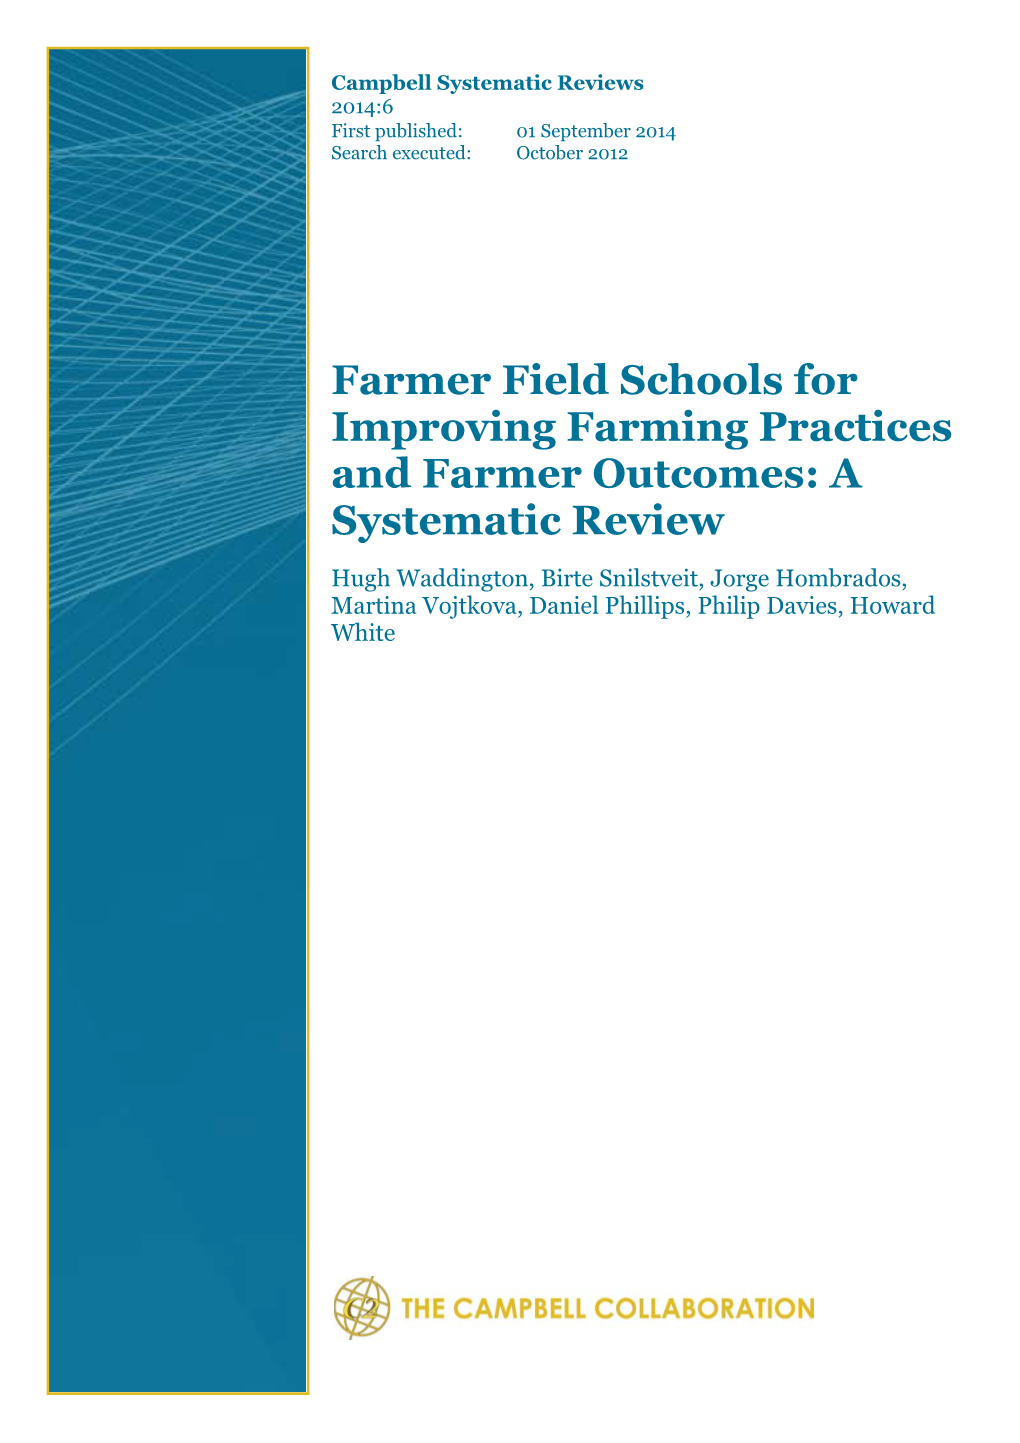 Farmer Field Schools for Improving Farming Practices and Farmer Outcomes: a Systematic Review